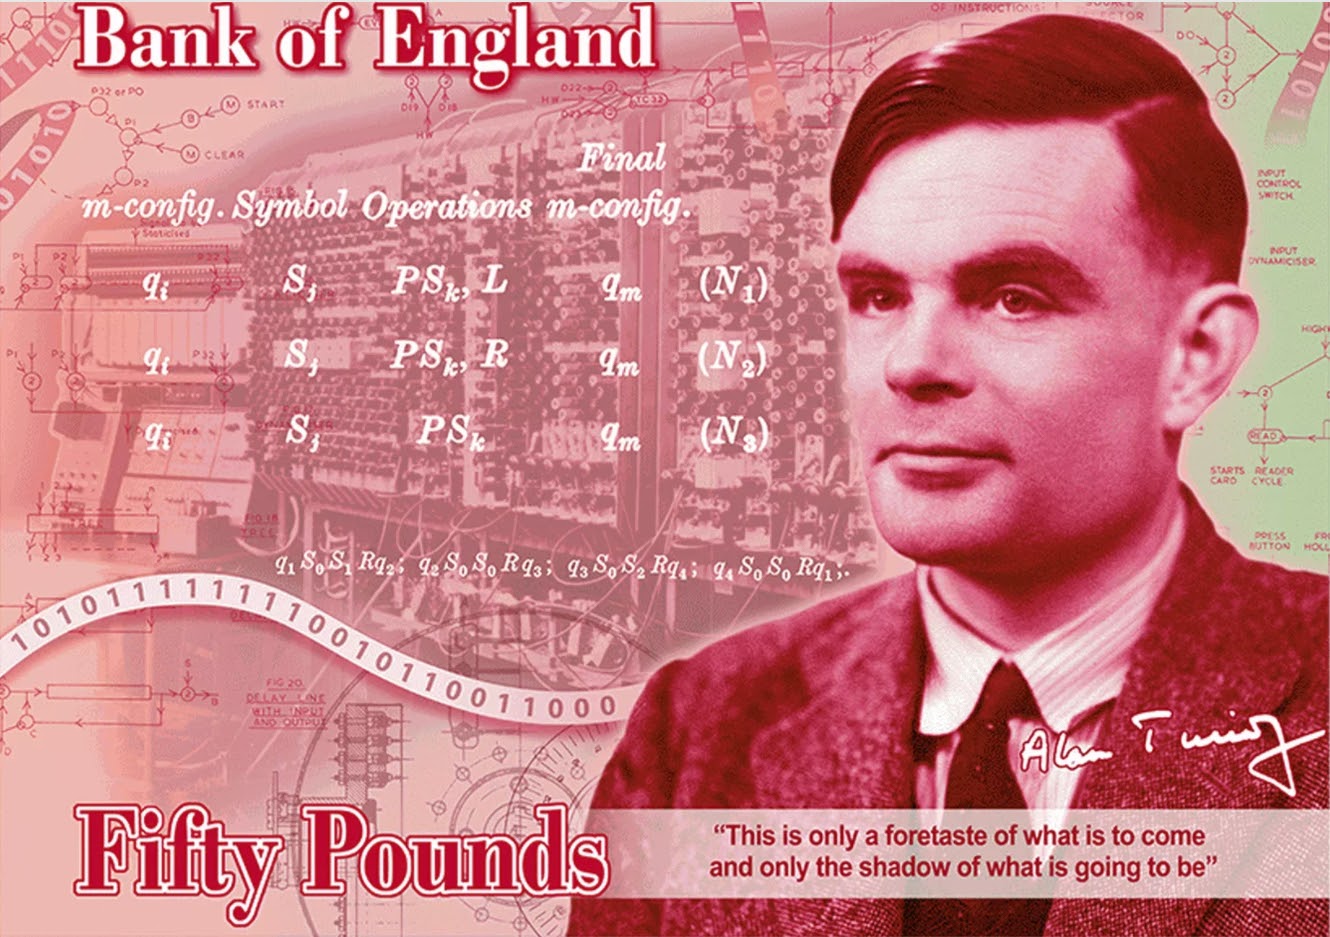 Alan Turing and the £50 note